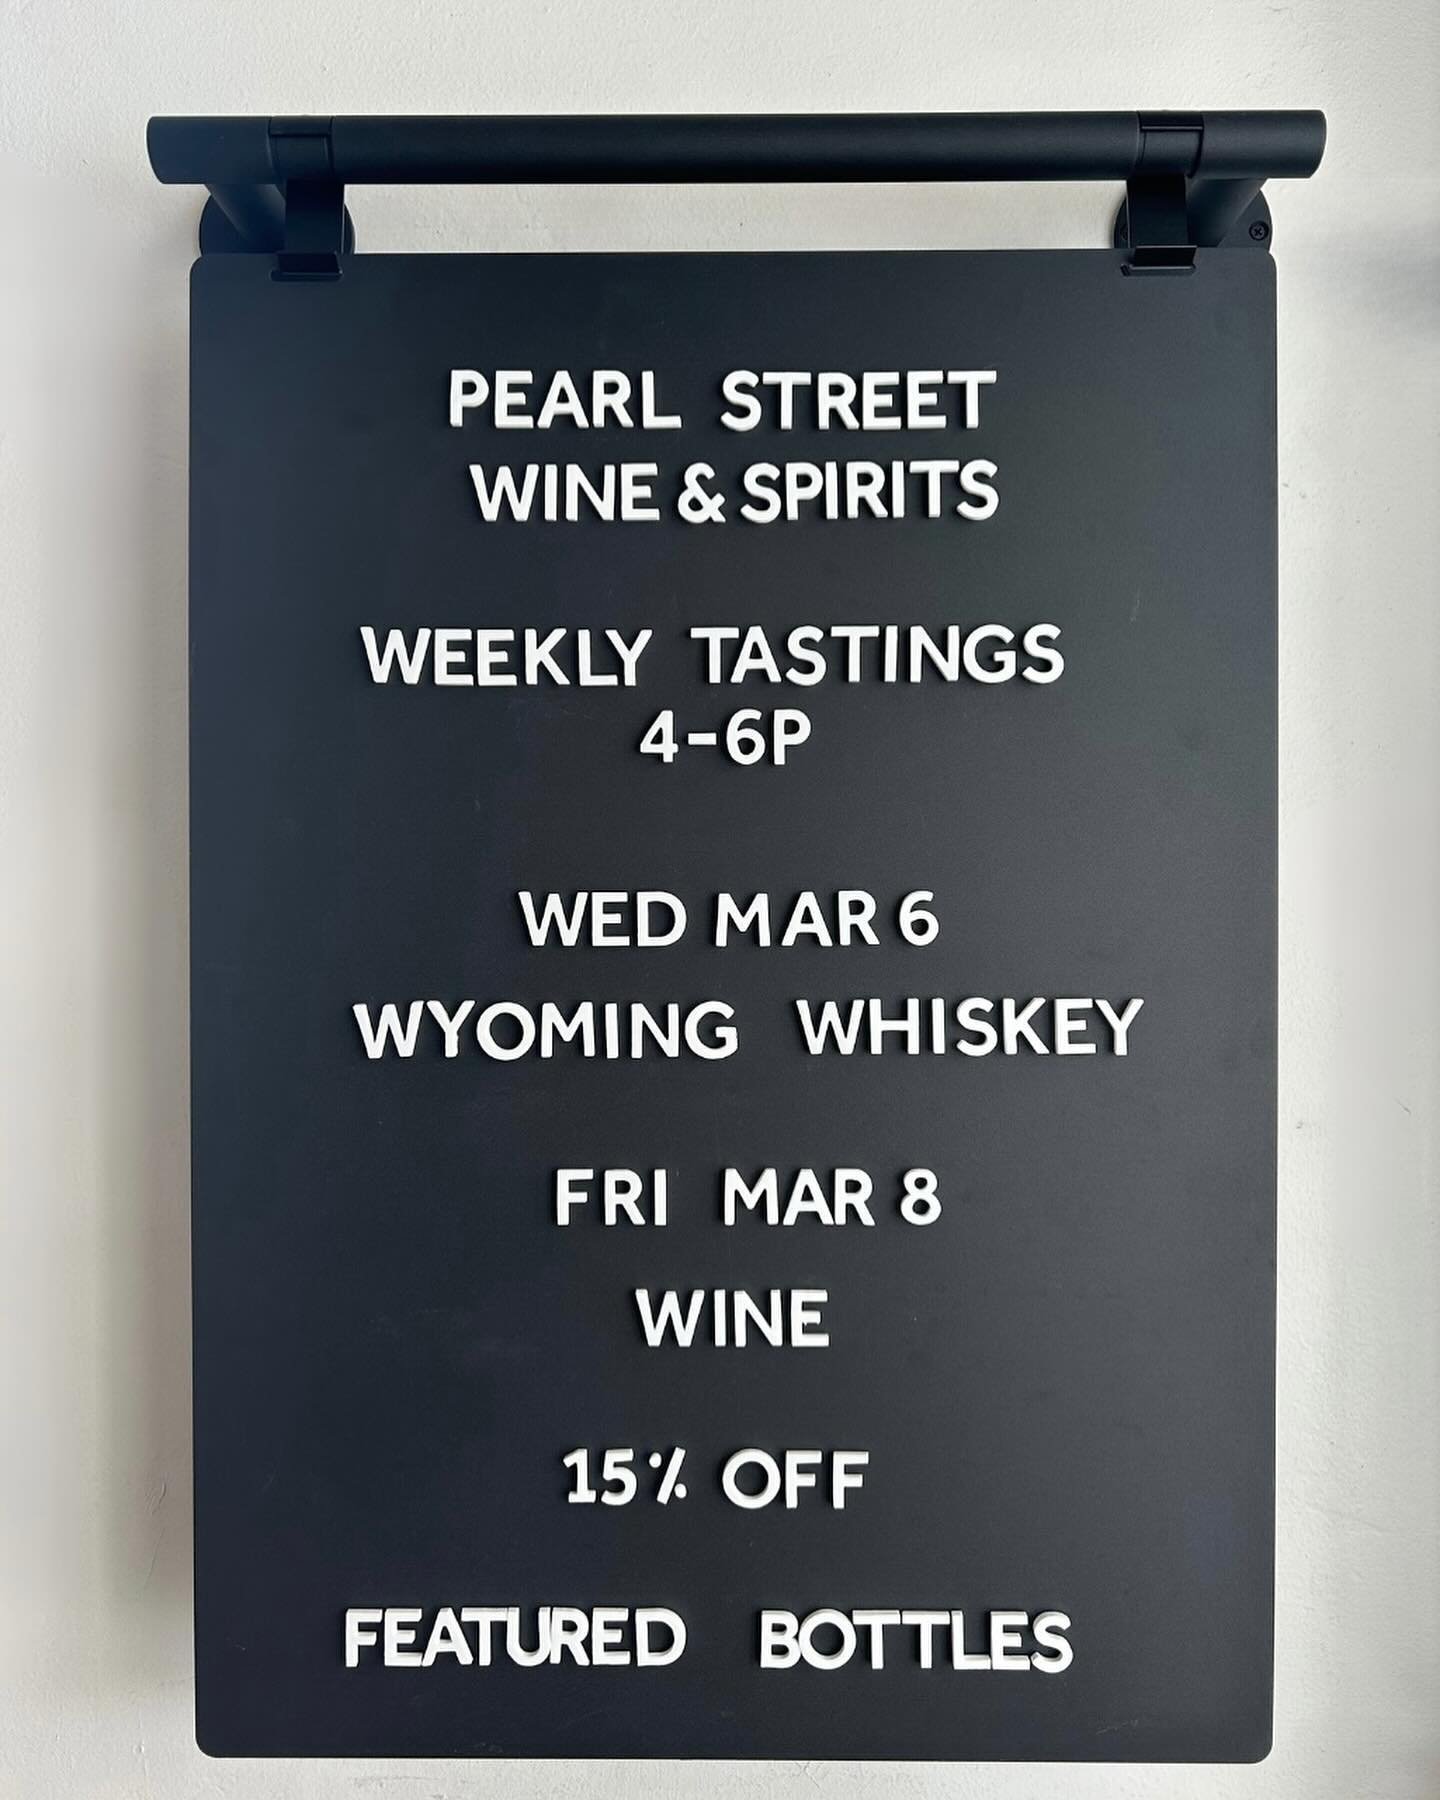 This week we&rsquo;re tasting @wyomingwhiskey&rsquo;s single barrel bourbon whiskey and wines from @angelsandcowboyswines, @bodegasantajulia, and @astobizawine! Stop by from 4-6 pm and enjoy 15% off featured bottles!